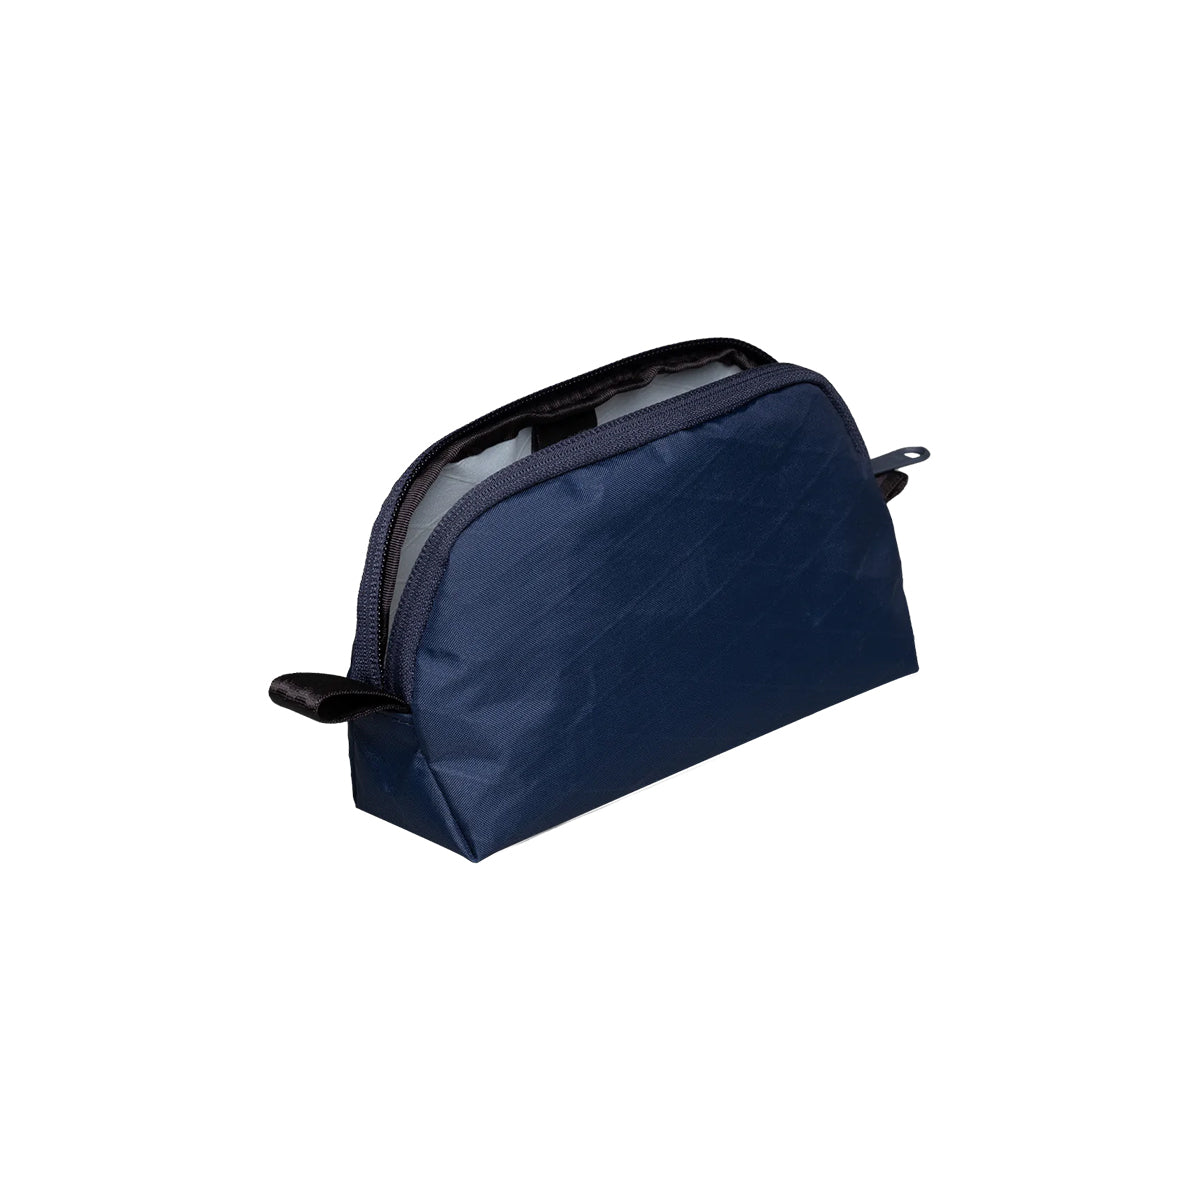 [PO] Able Carry : The Daily Stash Pouch : X-Pac Navy Blue (VX21)